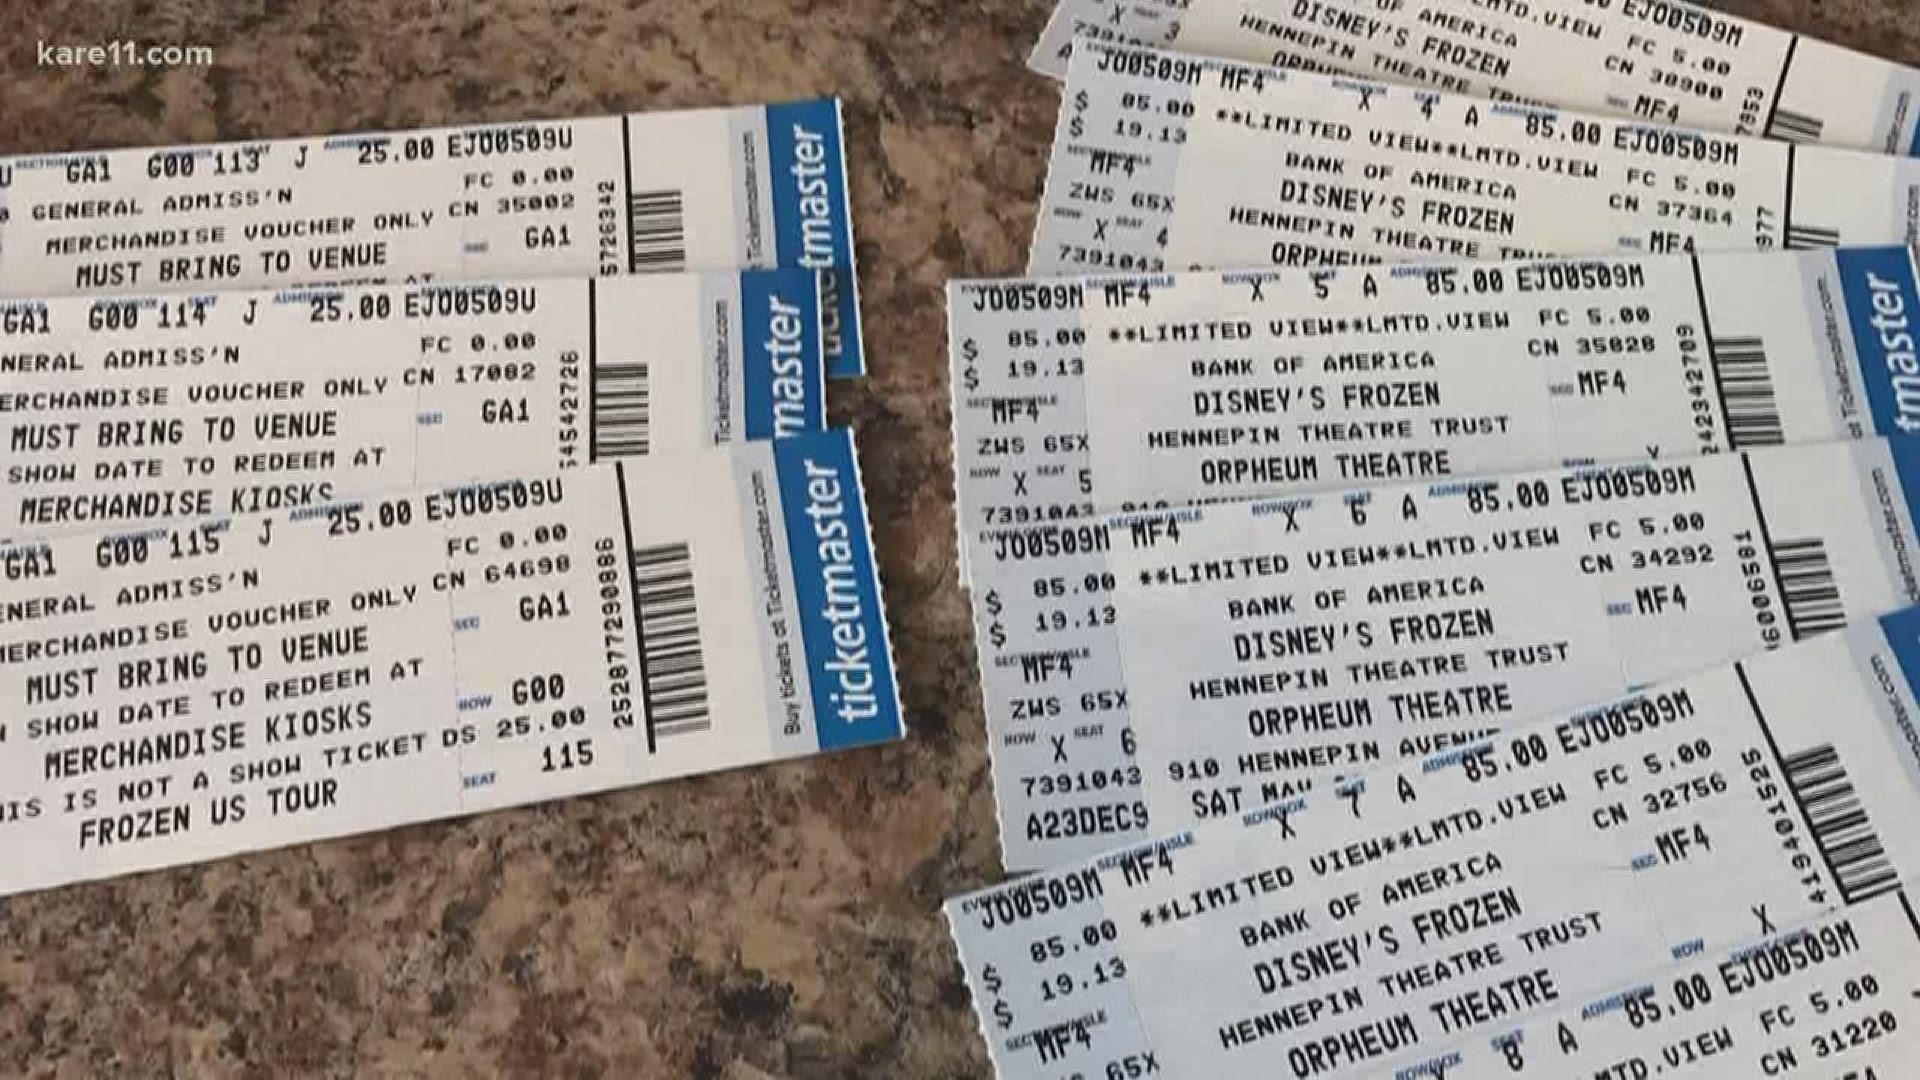 Some ticket sellers only offer refunds for events if they've been cancelled because of COVID-19 – not just postponed – leaving people out hundreds of dollars.